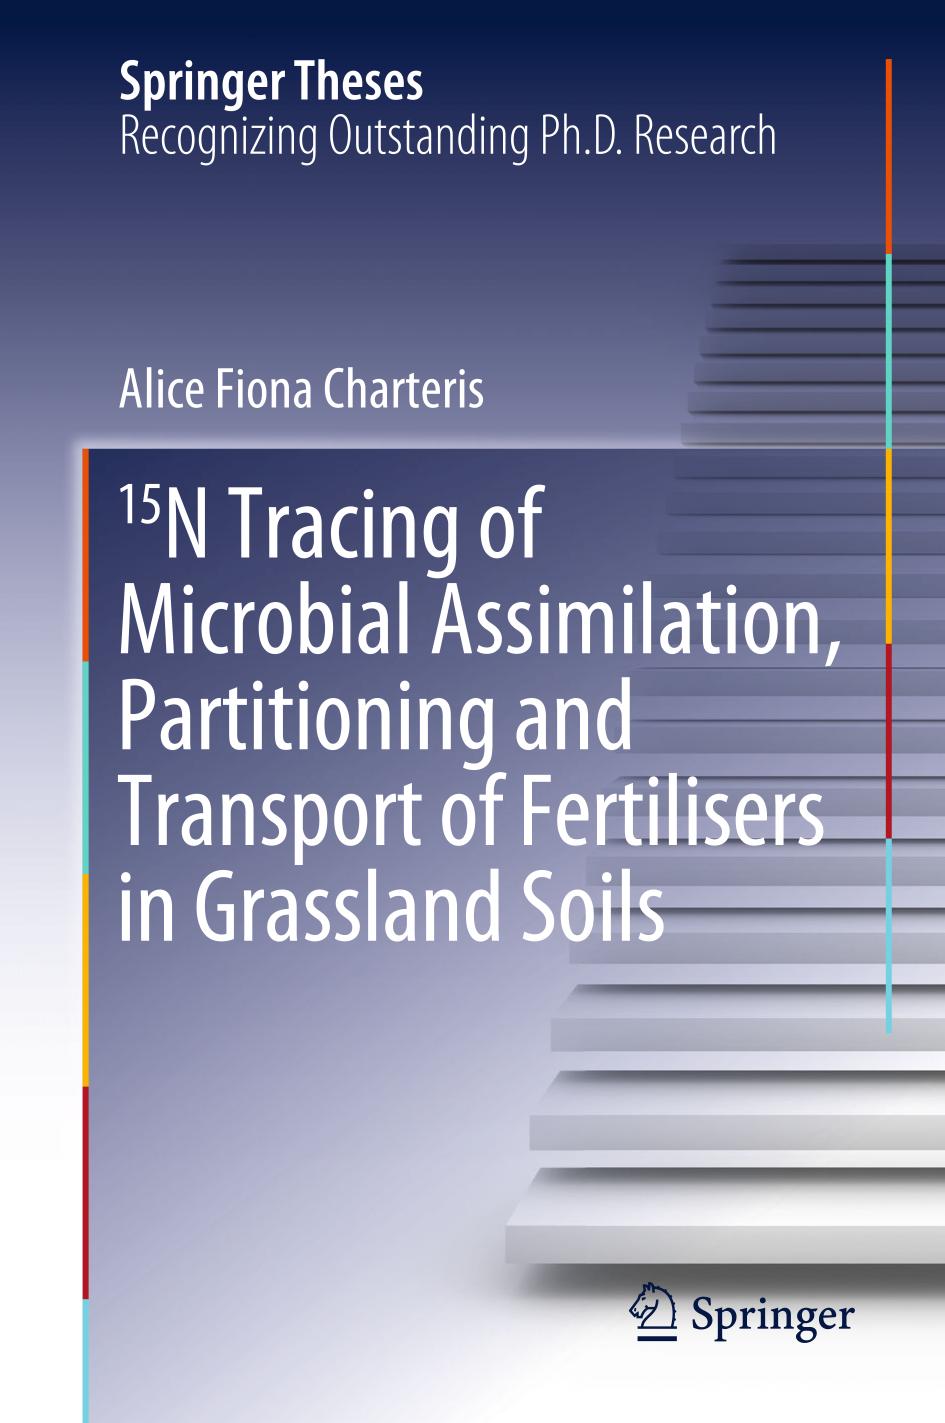 15N tracing of microbial assimilation, partitioning and transport of fertilisers in grassland soils